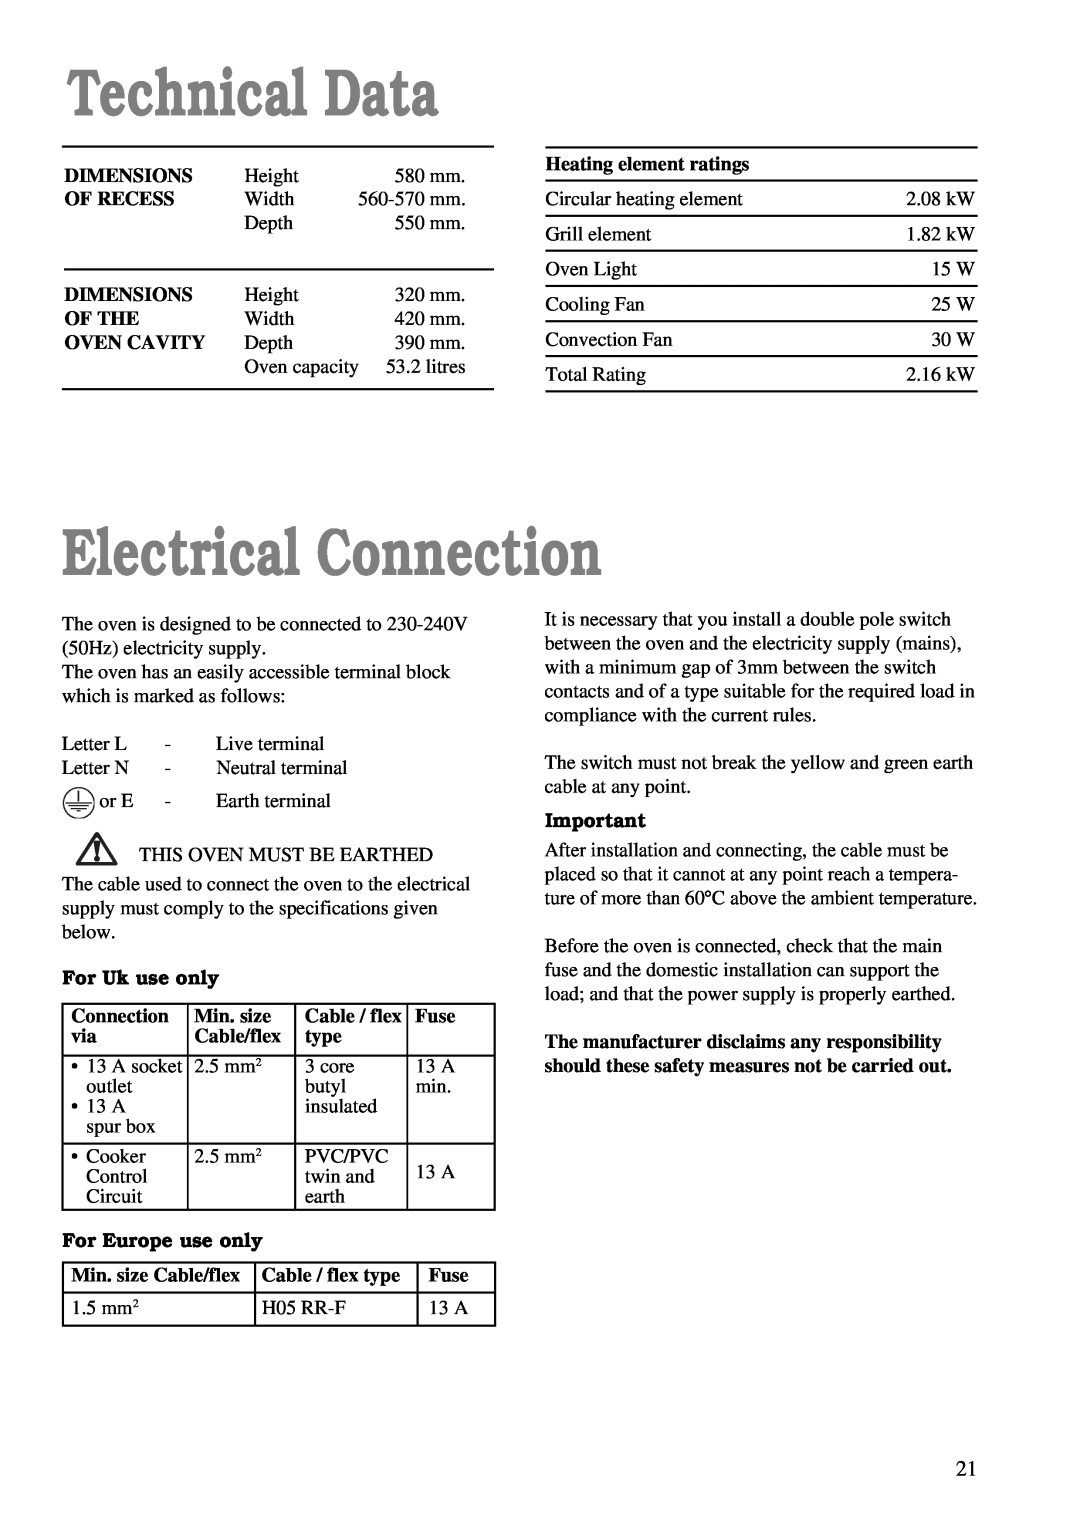 Tricity Bendix TBS 603 Technical Data, Electrical Connection, Dimensions, Of Recess, Of The, Oven Cavity, For Uk use only 